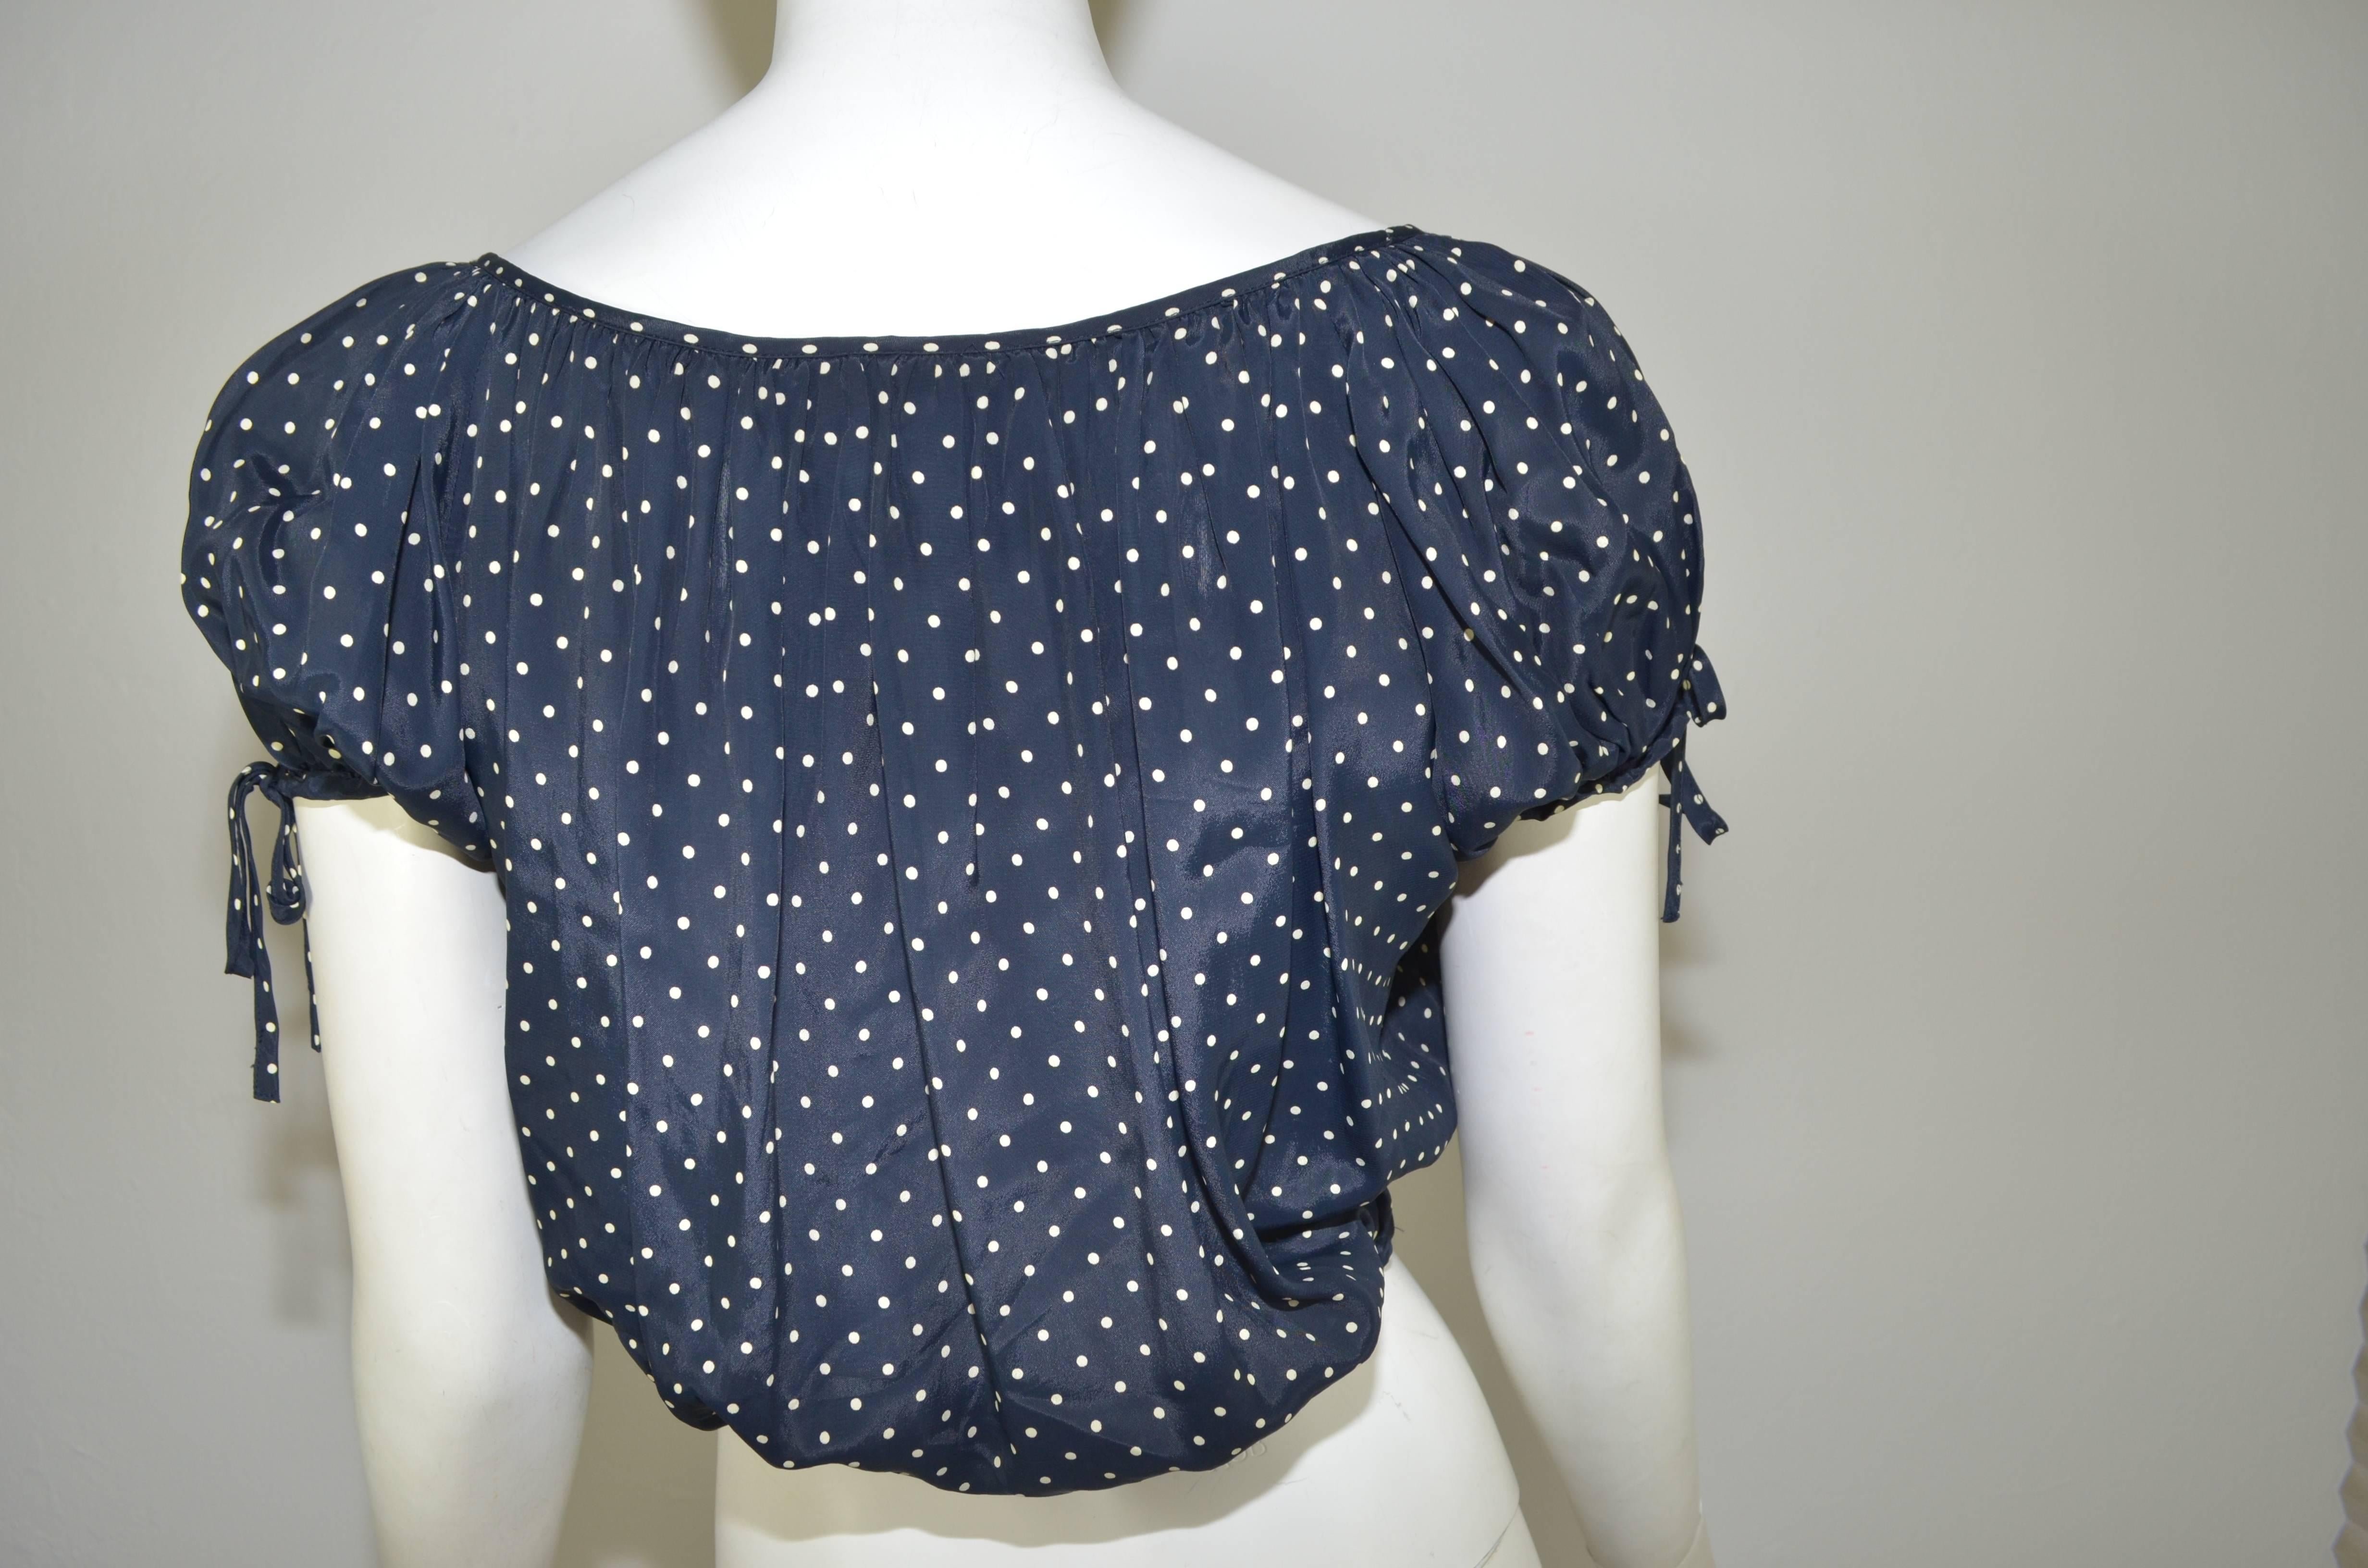 Moschino Cheap & Chic Polka Dot Crop Top Peasant Blouse In Excellent Condition In Carmel, CA